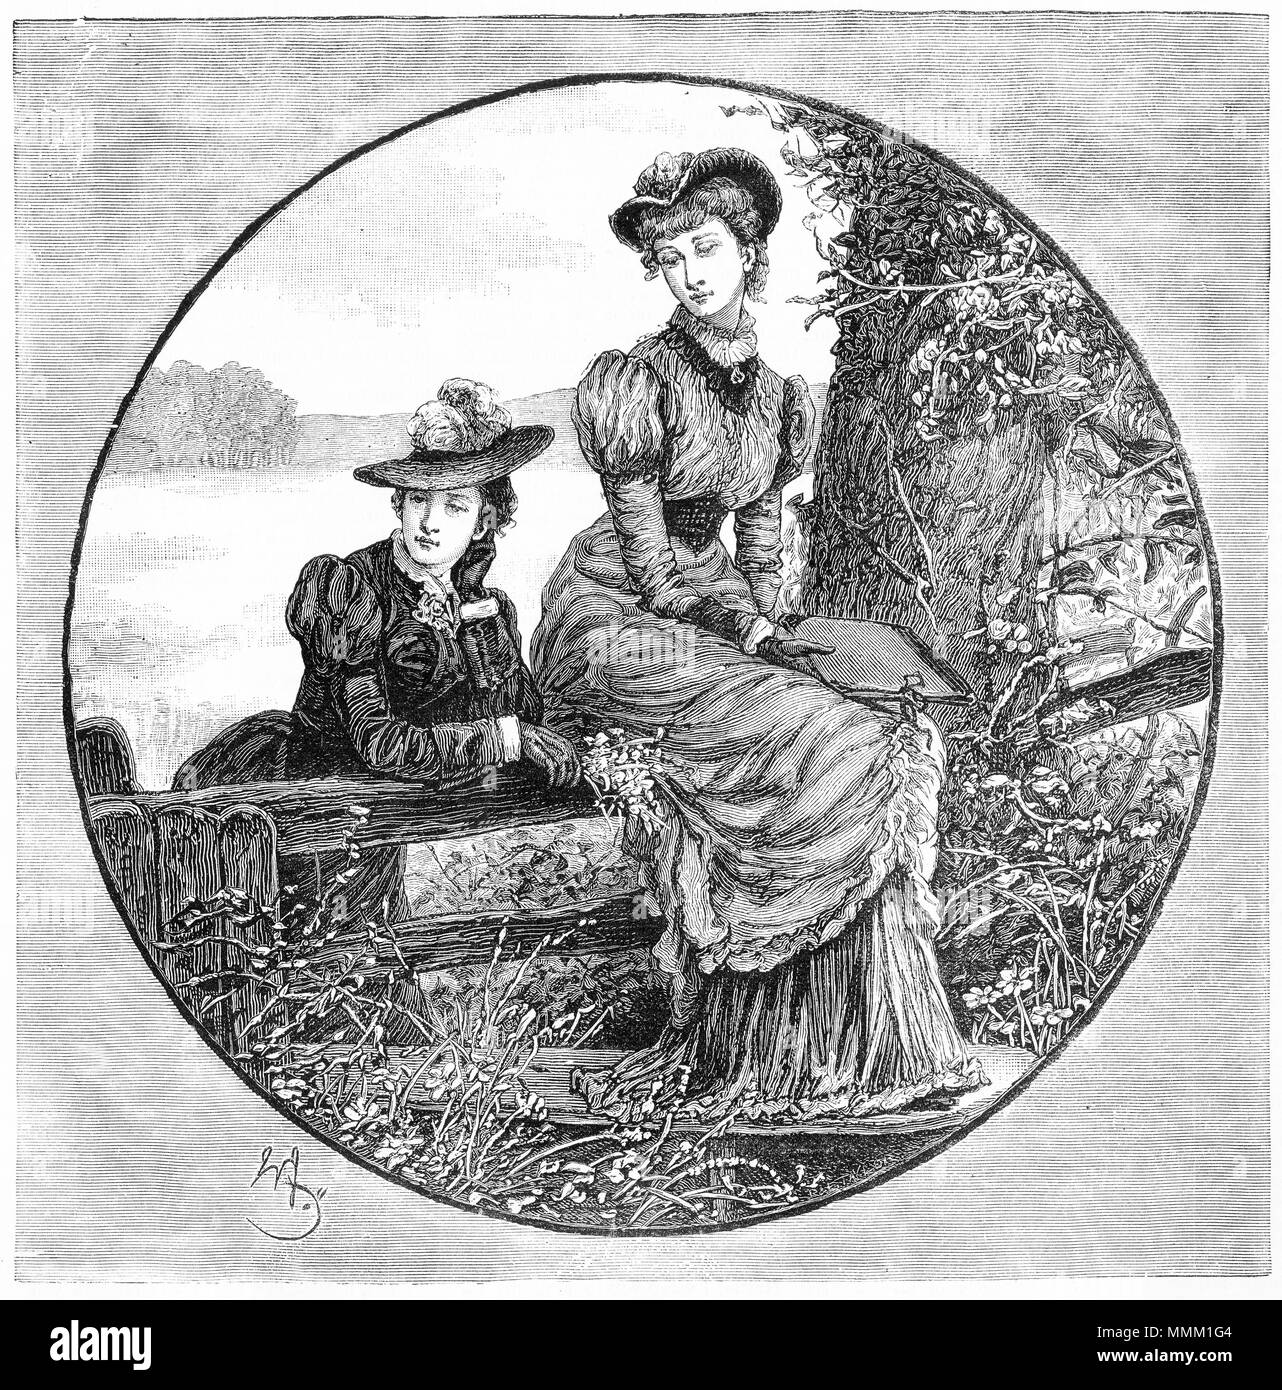 Engraving of two winsome young women in Victorian dress. From an original engraving in the Girl's Own Paper magazine 1882. Stock Photo